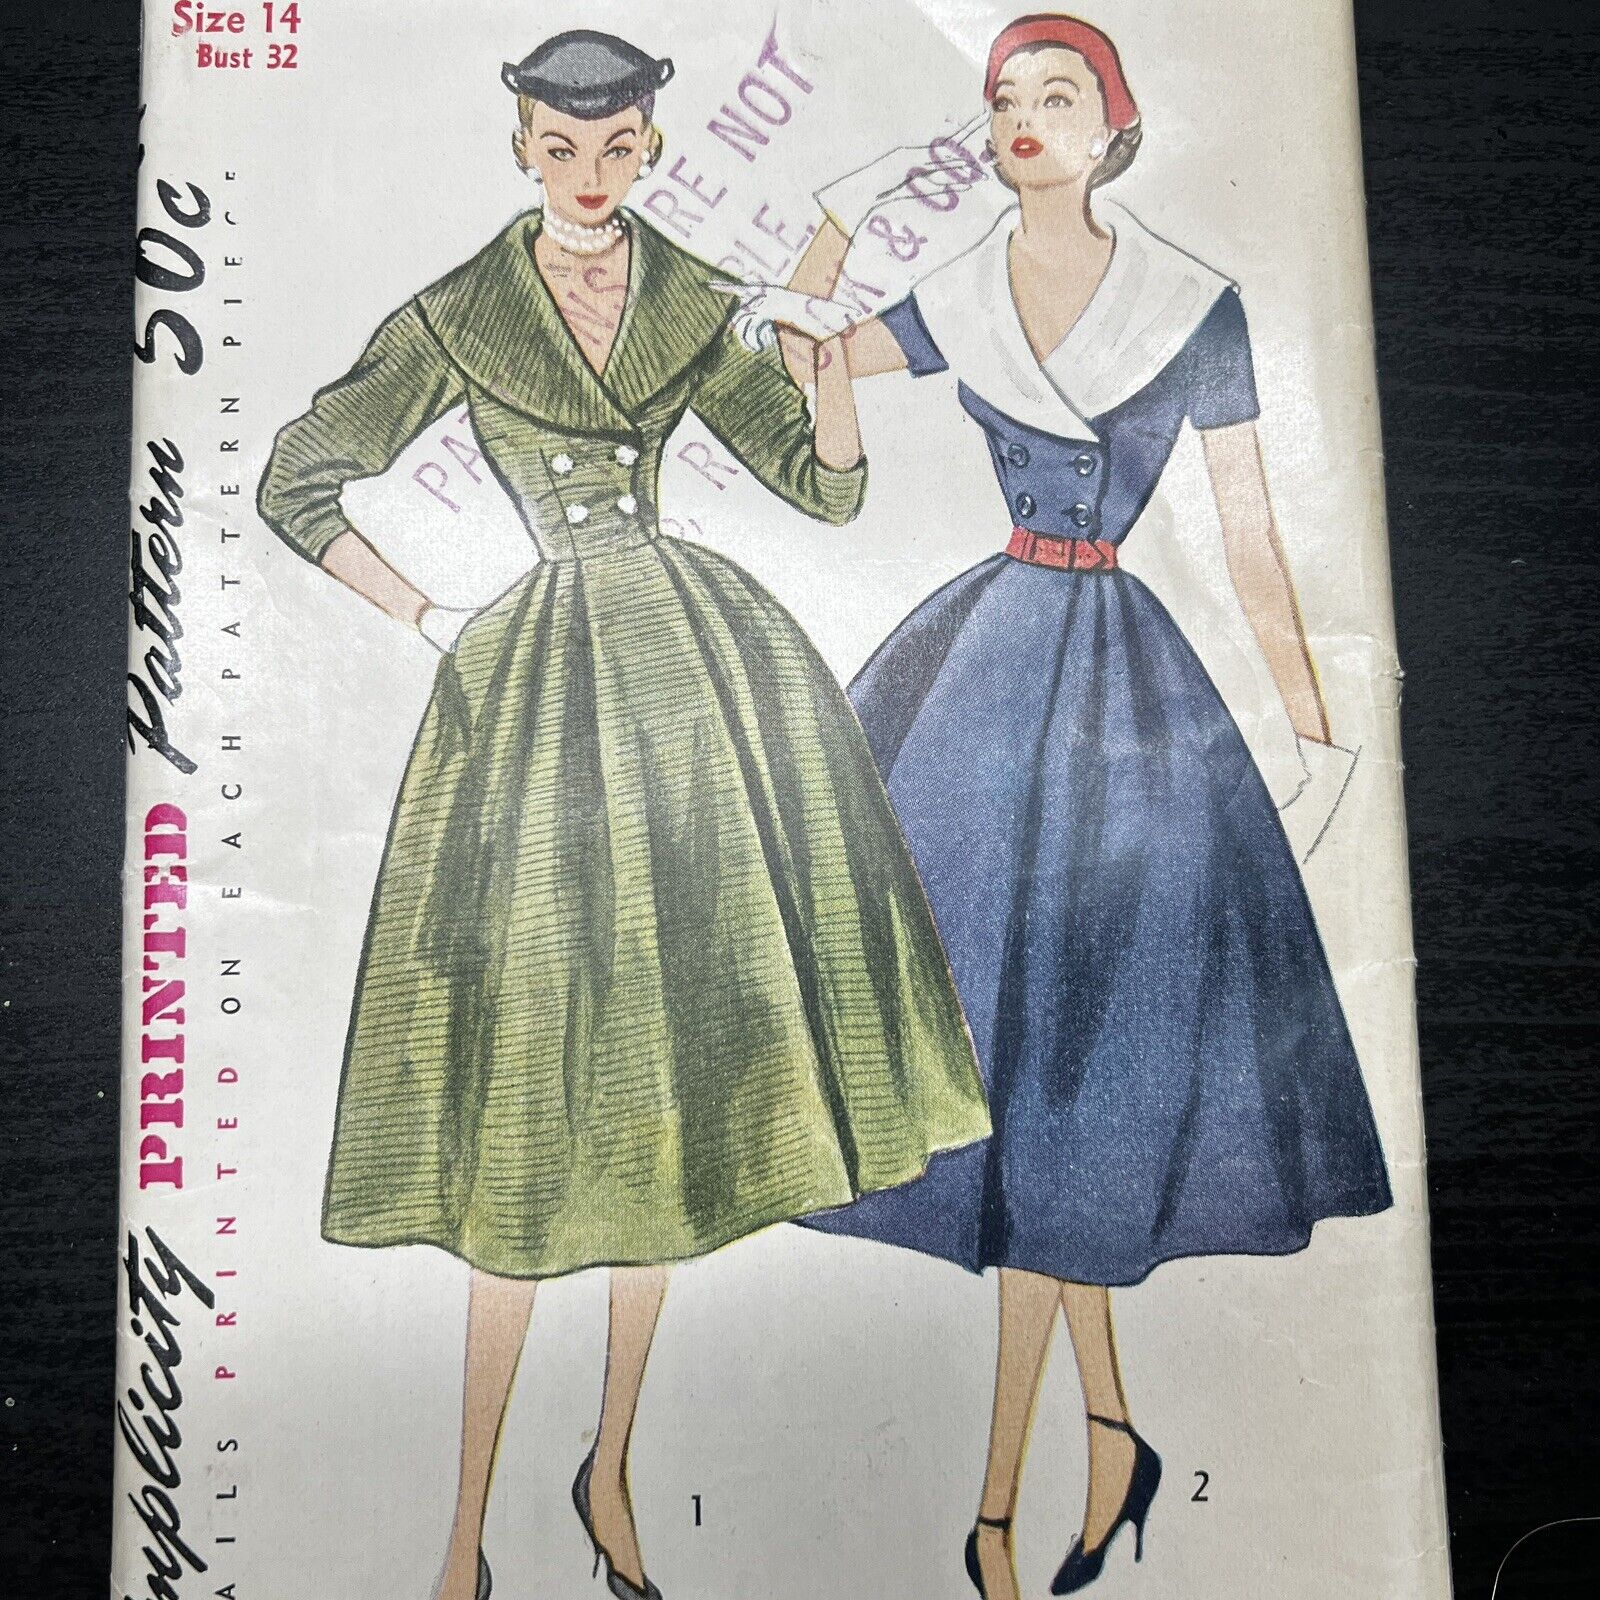 Vintage 1950s Simplicity 8451 Coat Dress with Collar Sewing Pattern 14 XS UNCUT